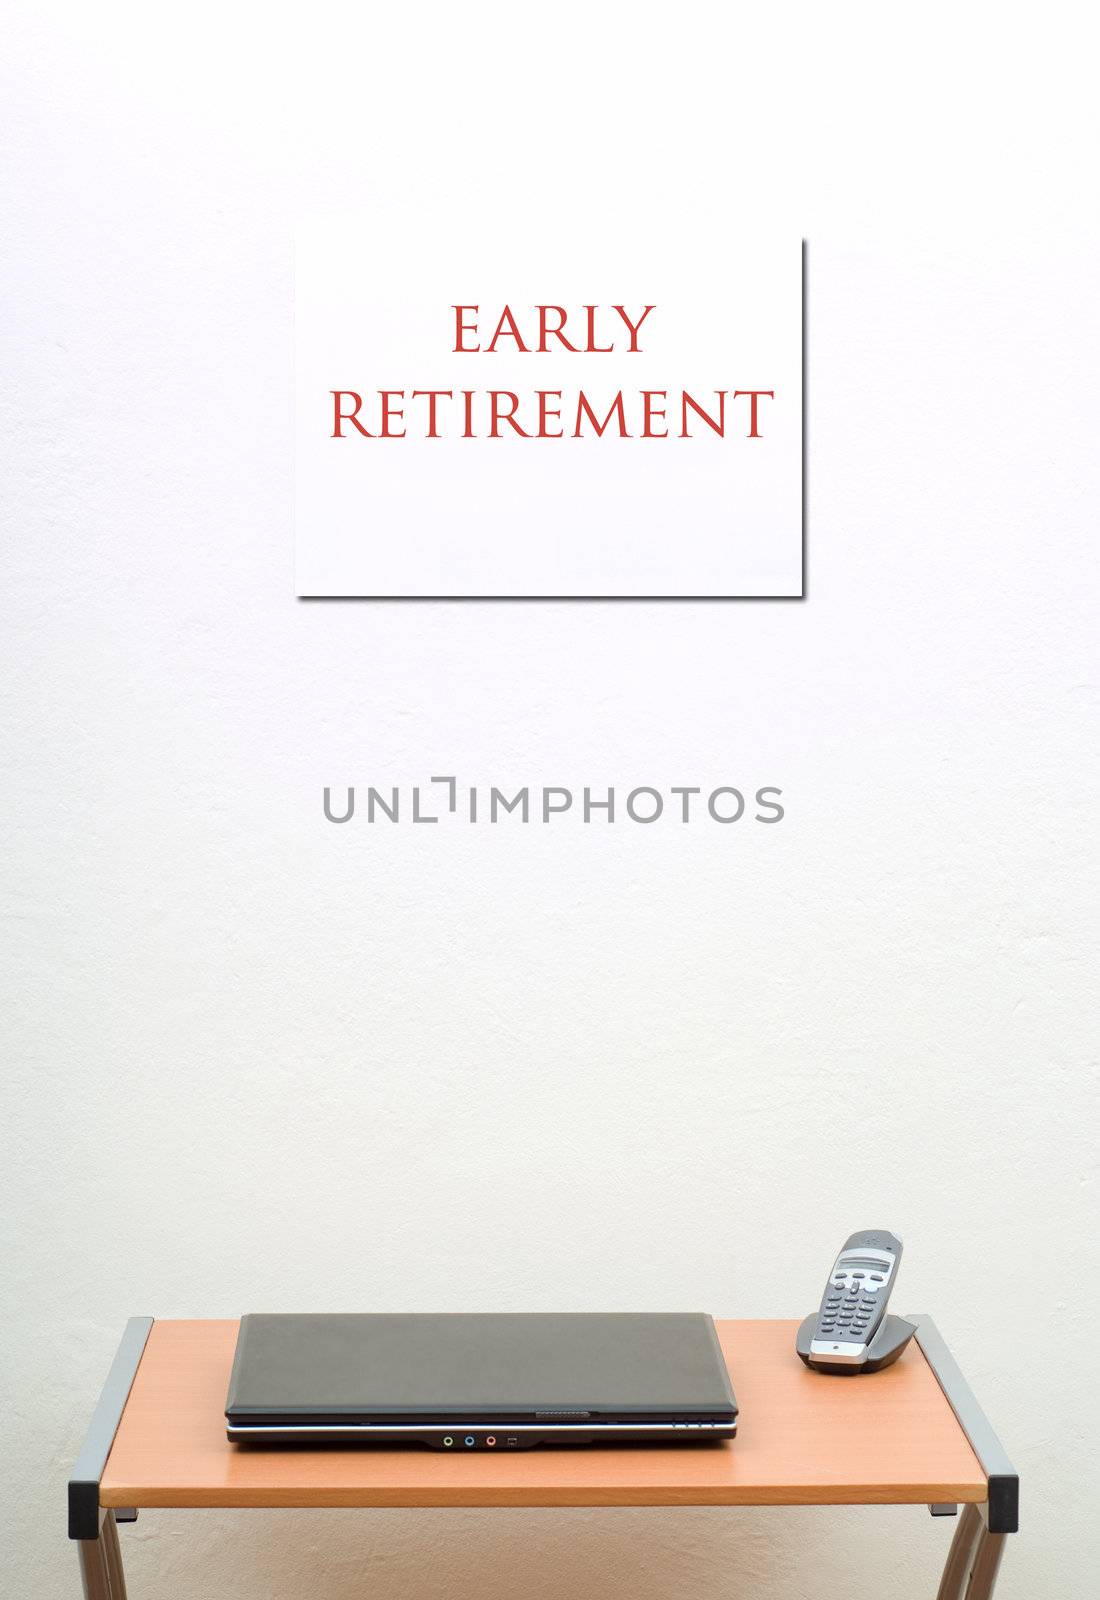 Early Retirement by alistaircotton